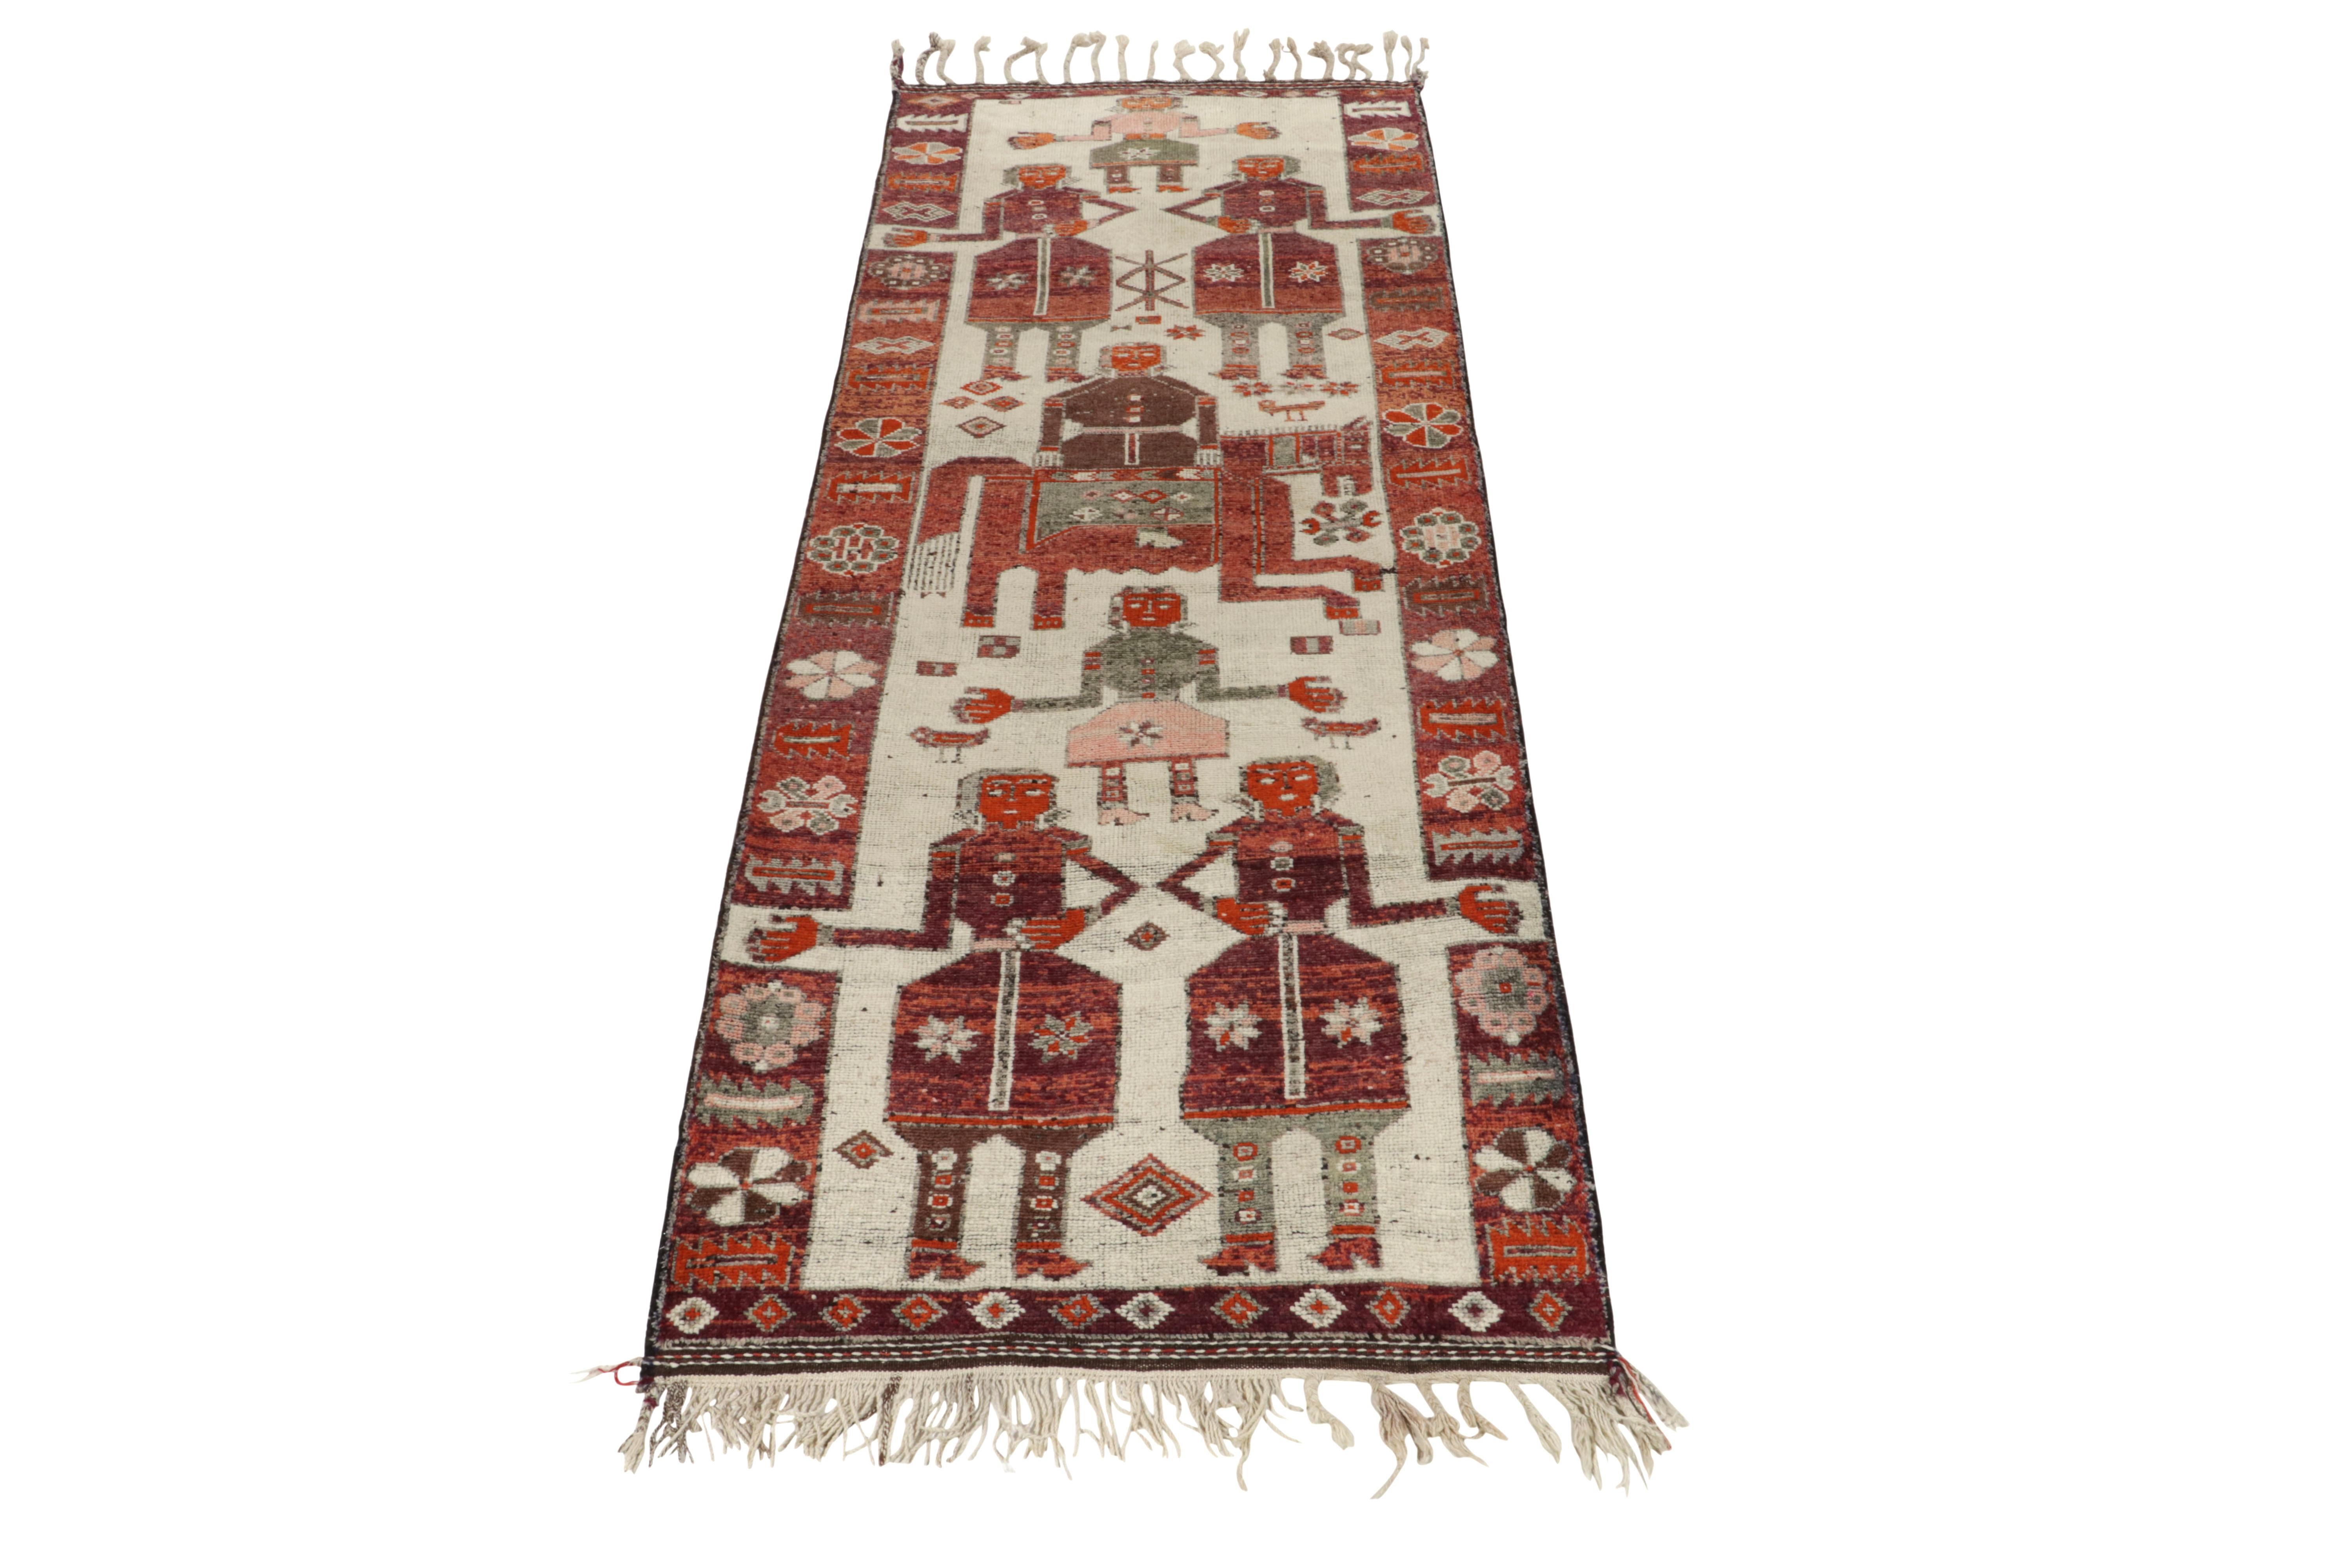 Hand-knotted in wool, a 4x12 runner from Rug & Kilim’s newly unveiled curation of rare tribal pieces. Originating from Turkey circa 1950-1960, a pictorial style as rare in exciting sensibility as it is in size. 

On the design, the rug enjoys